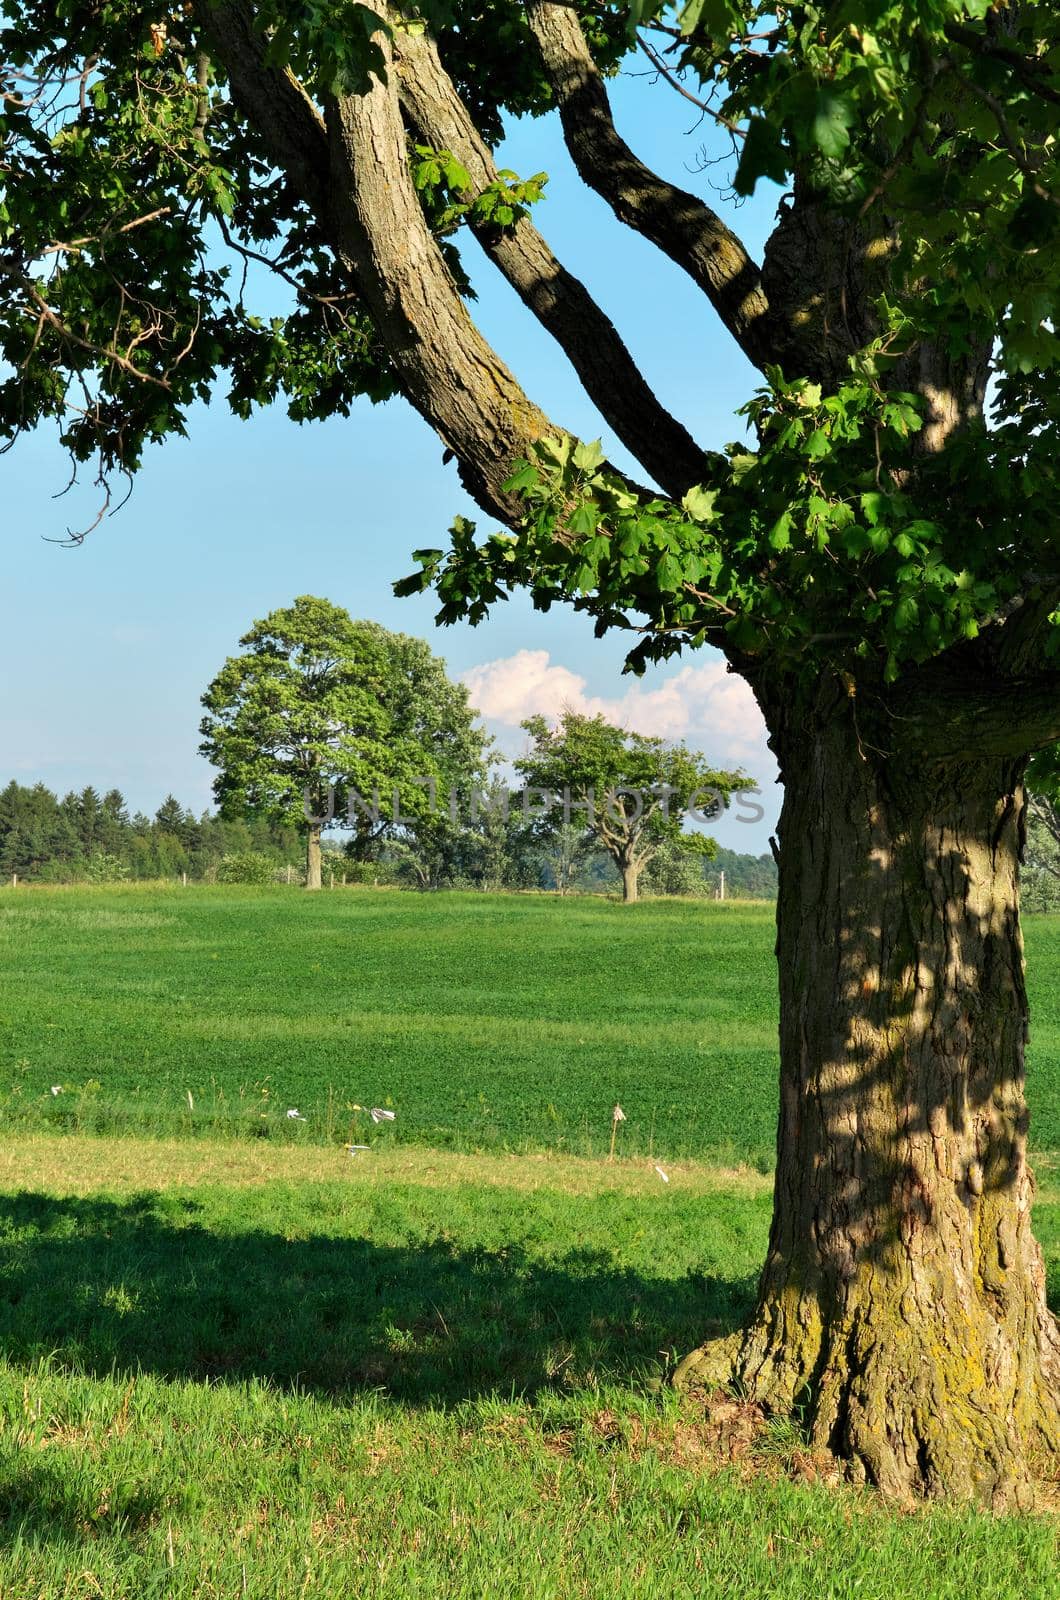 Idyllic Summer Scene at a Farm with Giant Maple Tree and Green Pastures on a Sunny Day. High quality photo